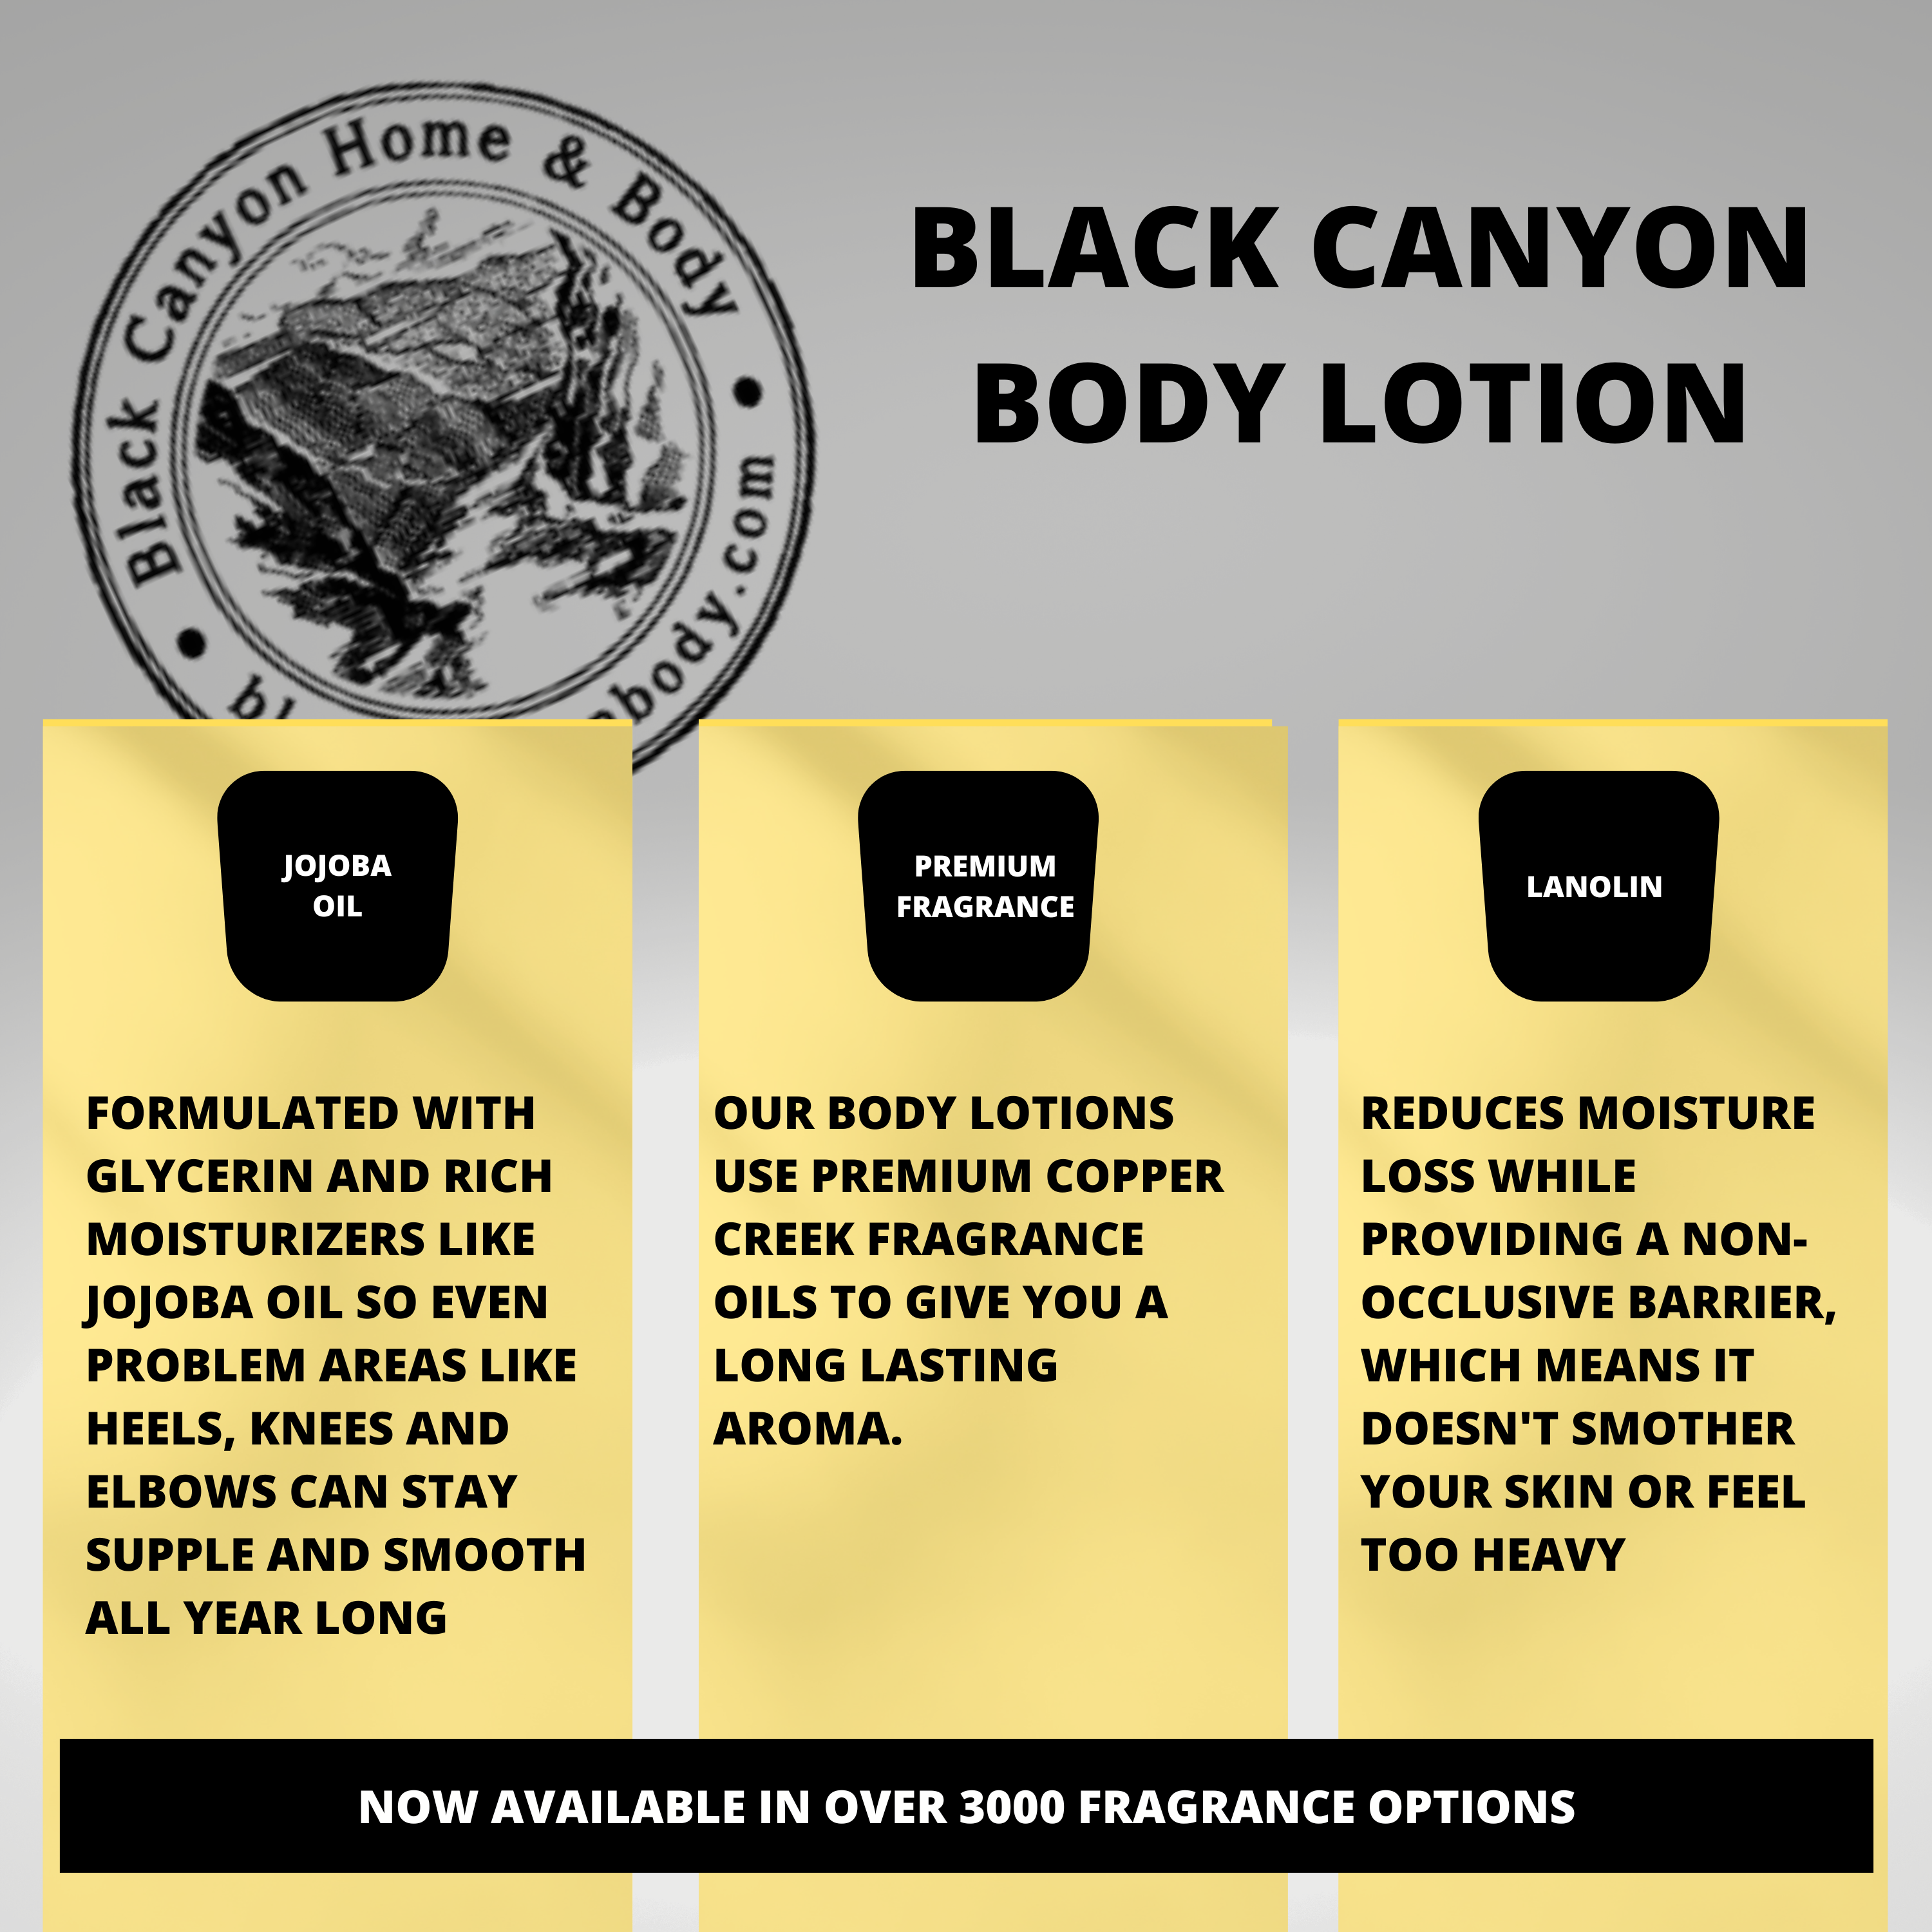 Black Canyon Banana Nut Bread Scented Luxury Body Lotion with Lanolin and Jojoba Oil